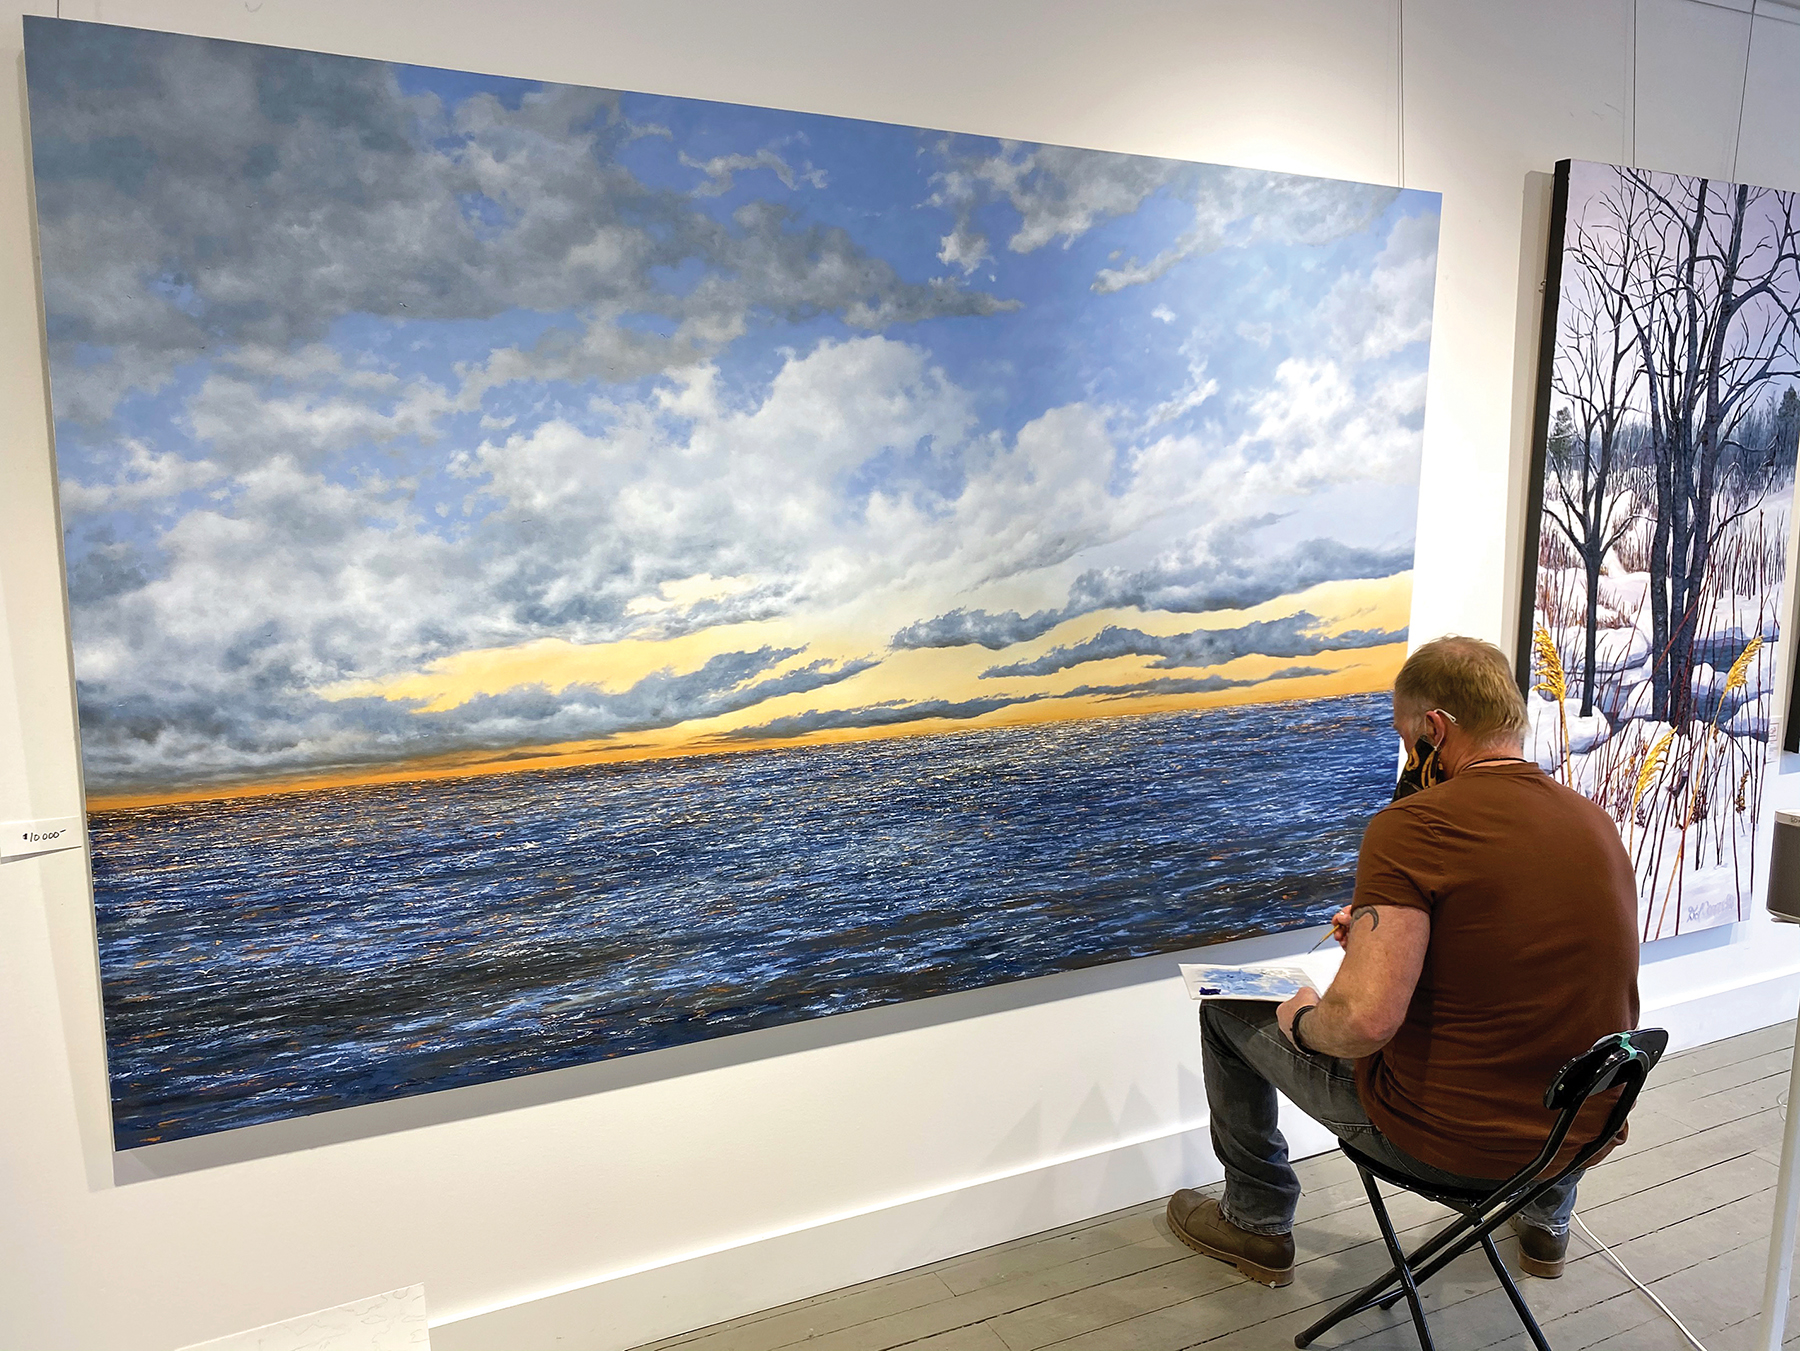 Lorne McDermott touches up his 60 x 96 seascape, “In Search of Serenity,” at the Loft Gallery in Thornbury.